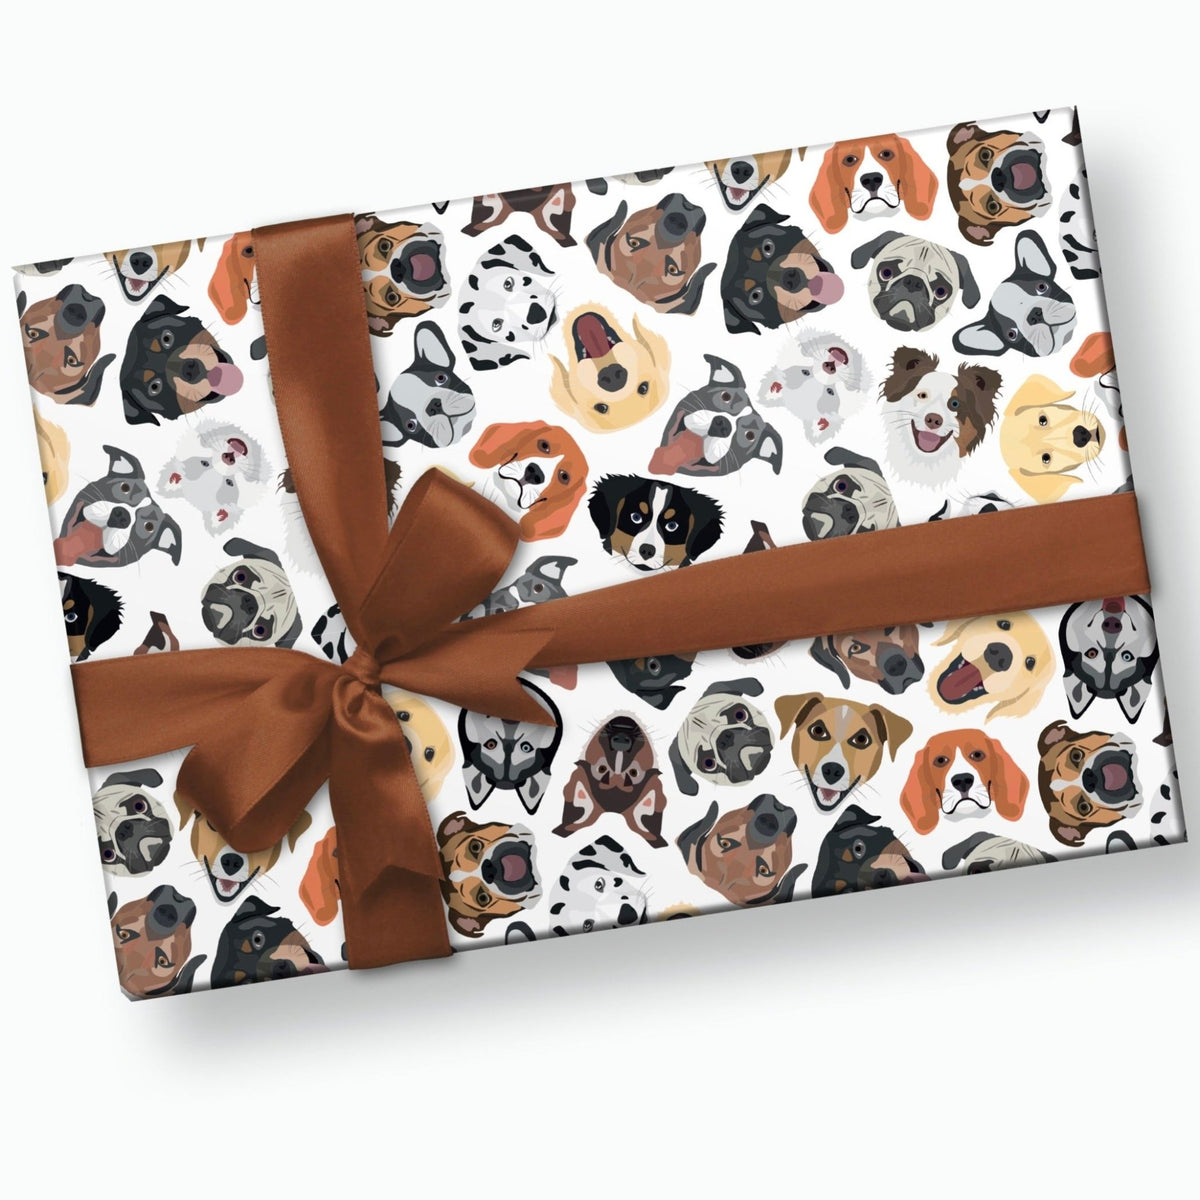 Farm Animals Recycled Wrapping Paper  Eco friendly Gift Wrap – planetwrapit